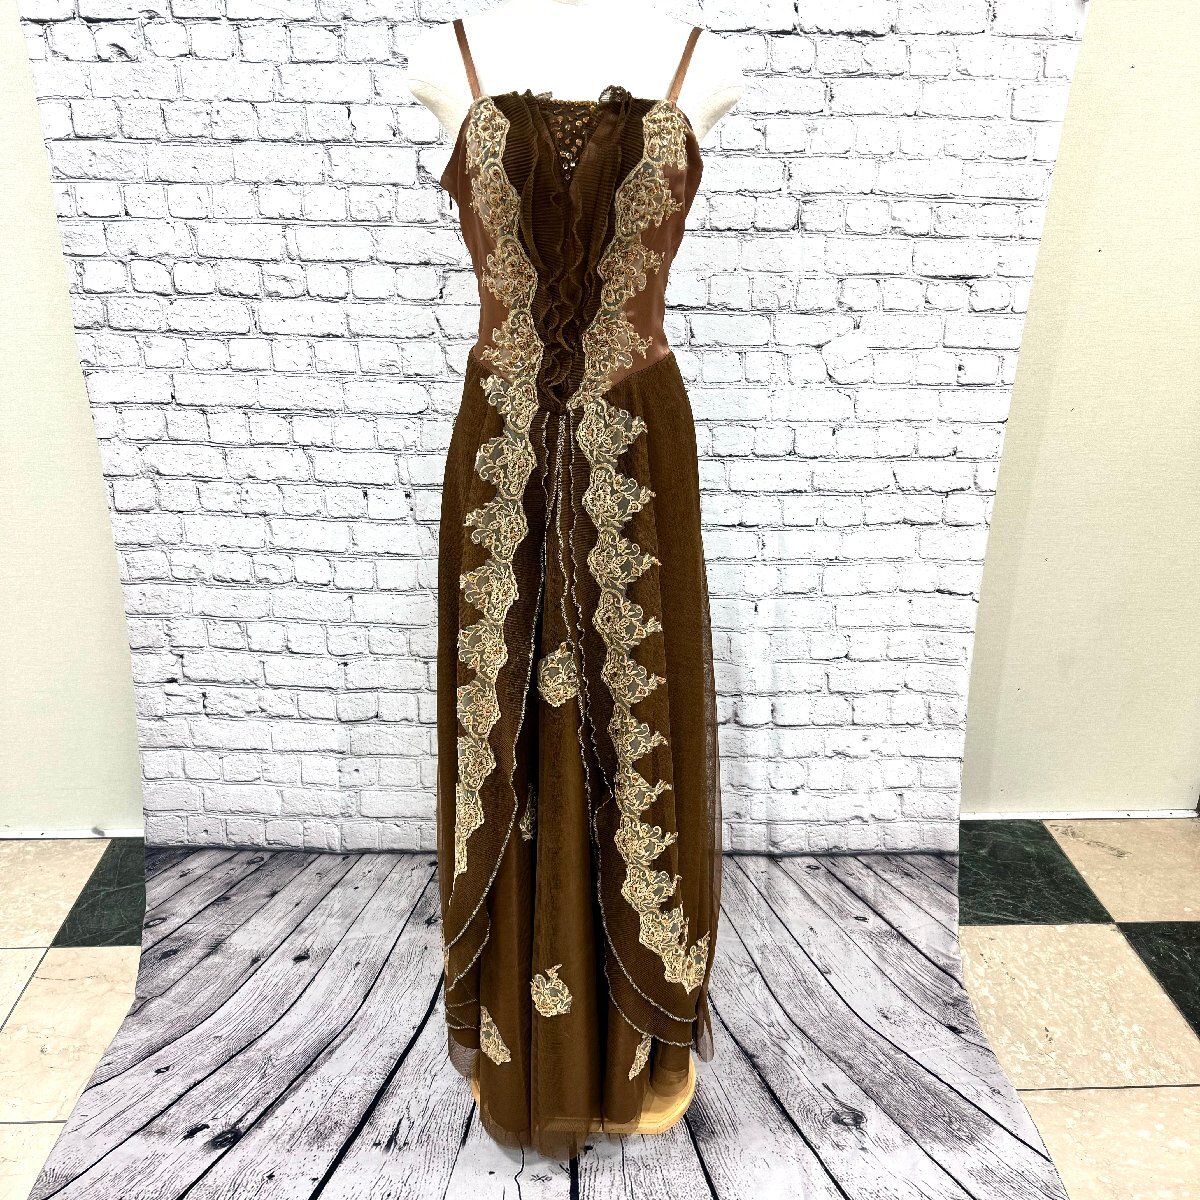 Sil-hou-ette tea Brown color dress party dress dress . costume wedding wedding ... costume Mai pcs departure table cosplay embroidery 